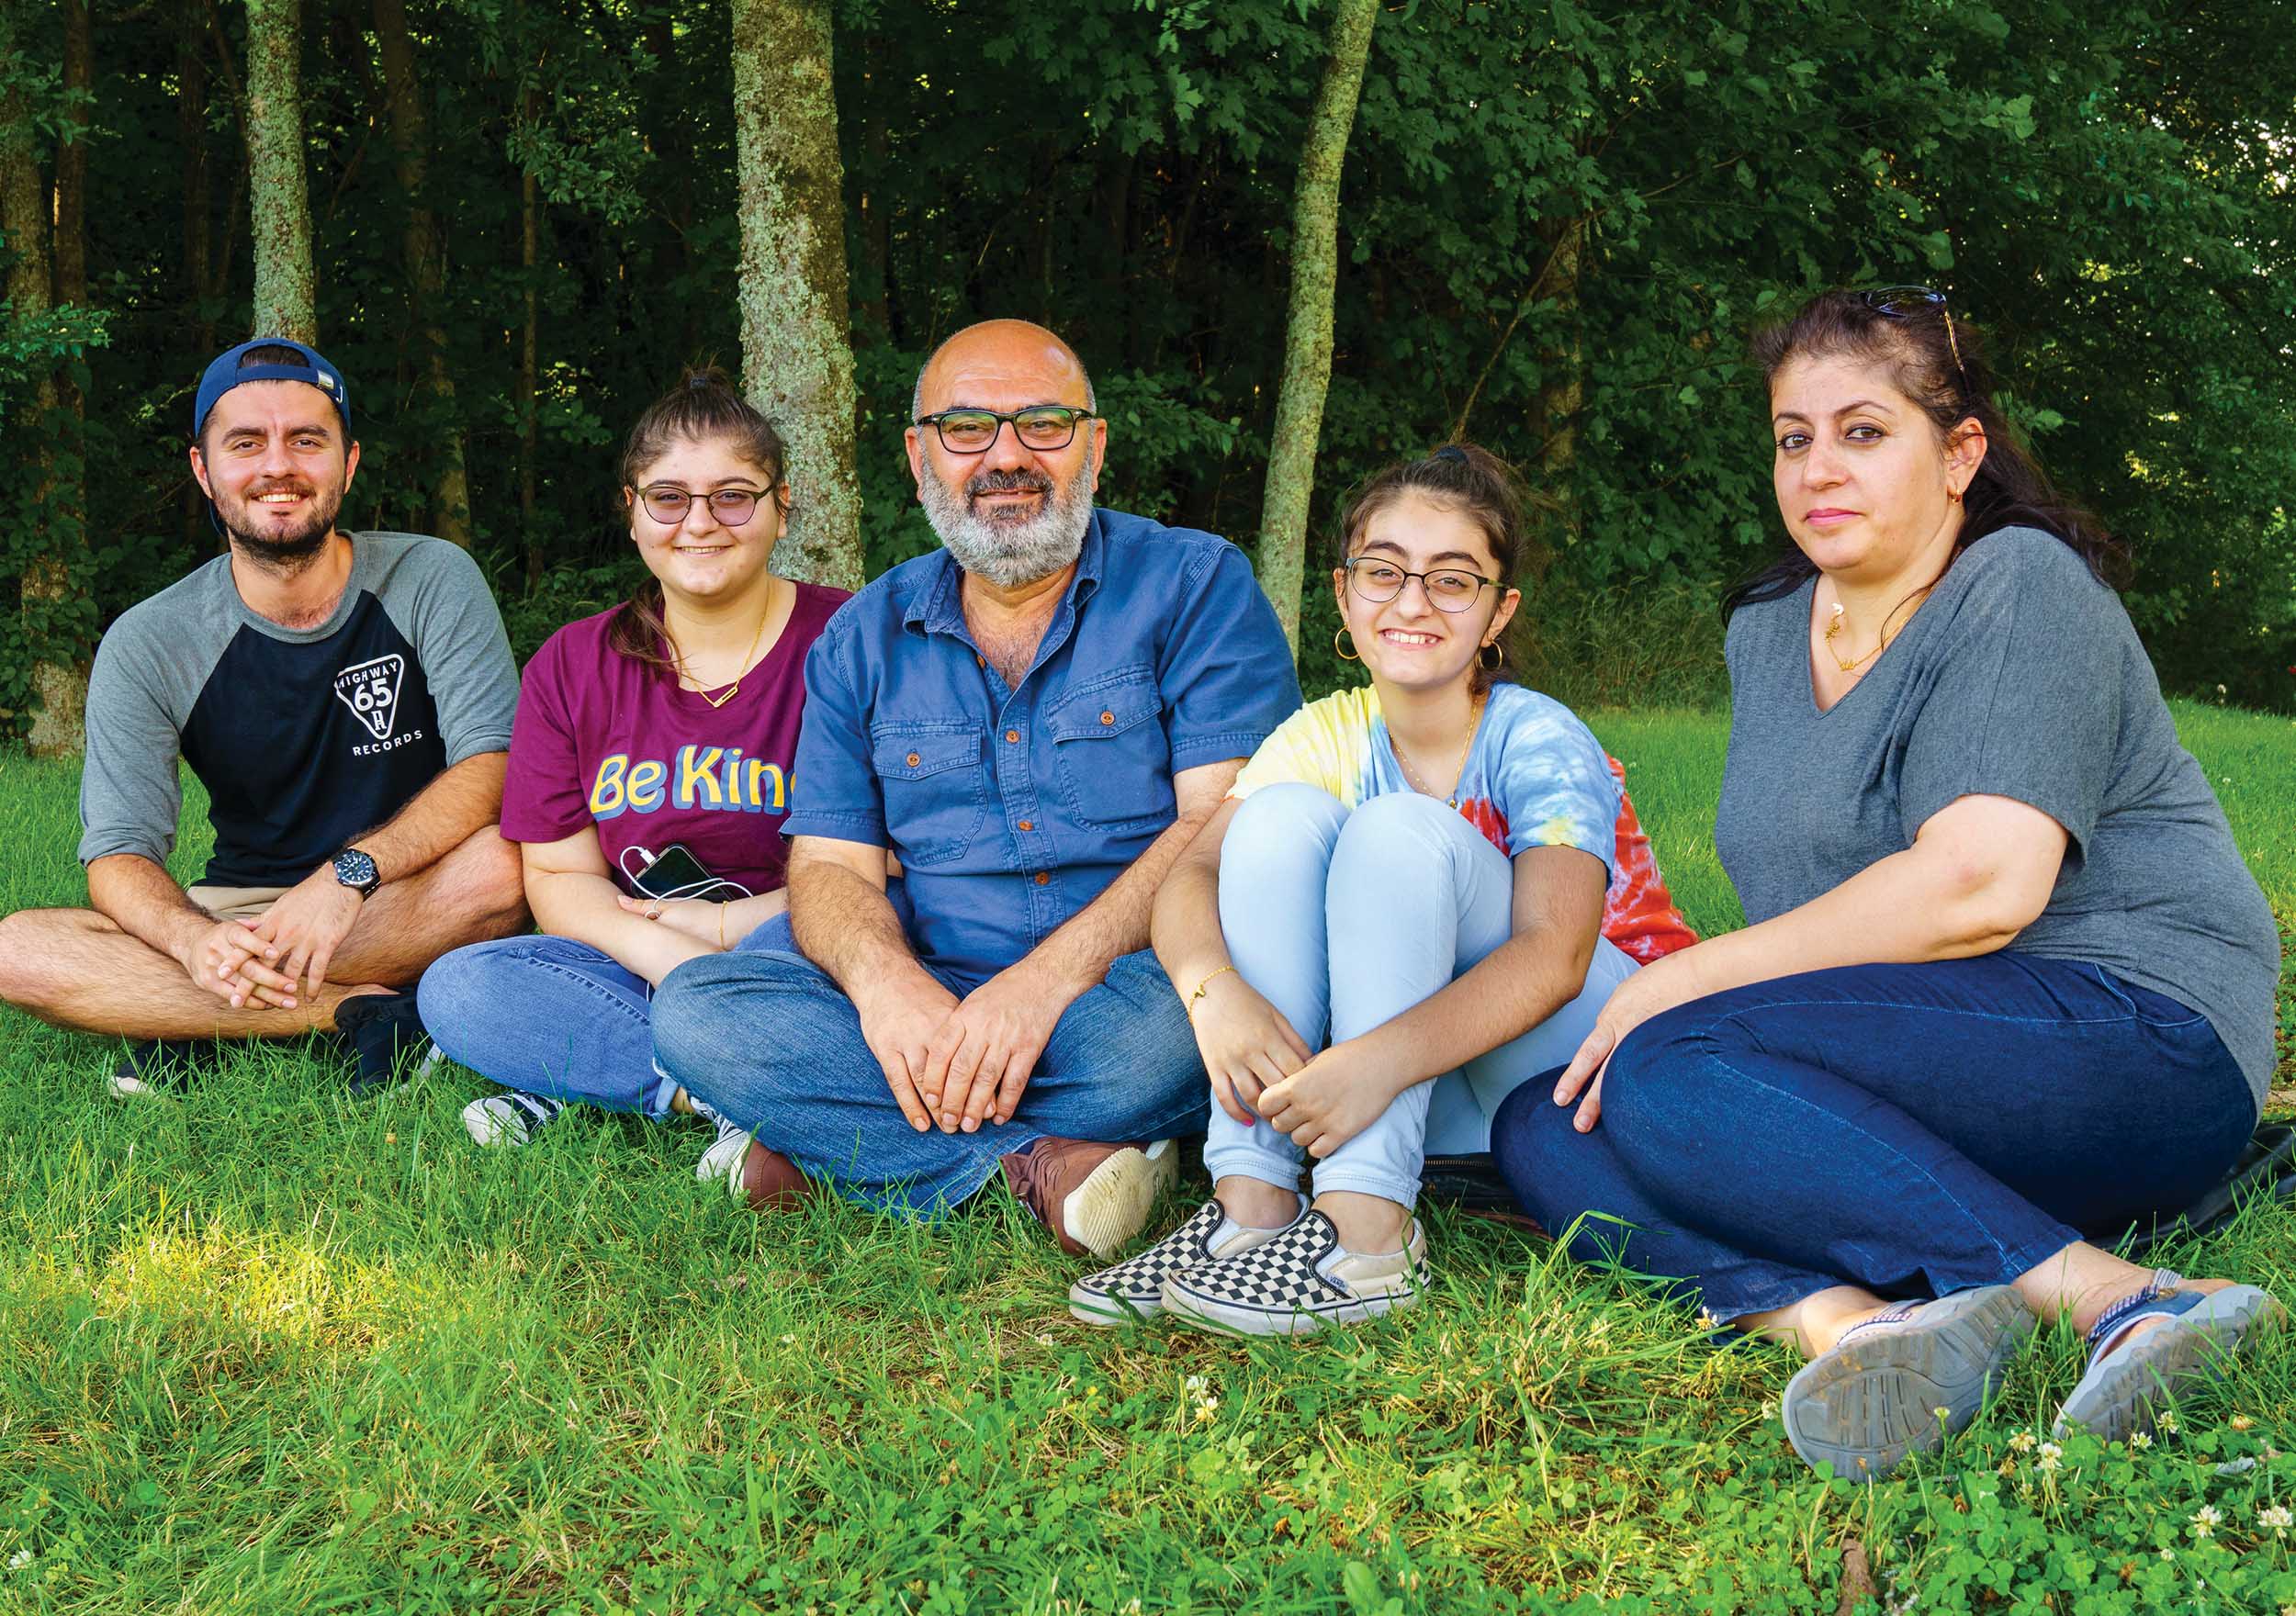 Postindustrial, A Kurdish homeland in Tennessee, Story and Photos by Carmen Gentile and Nish Nalbandian